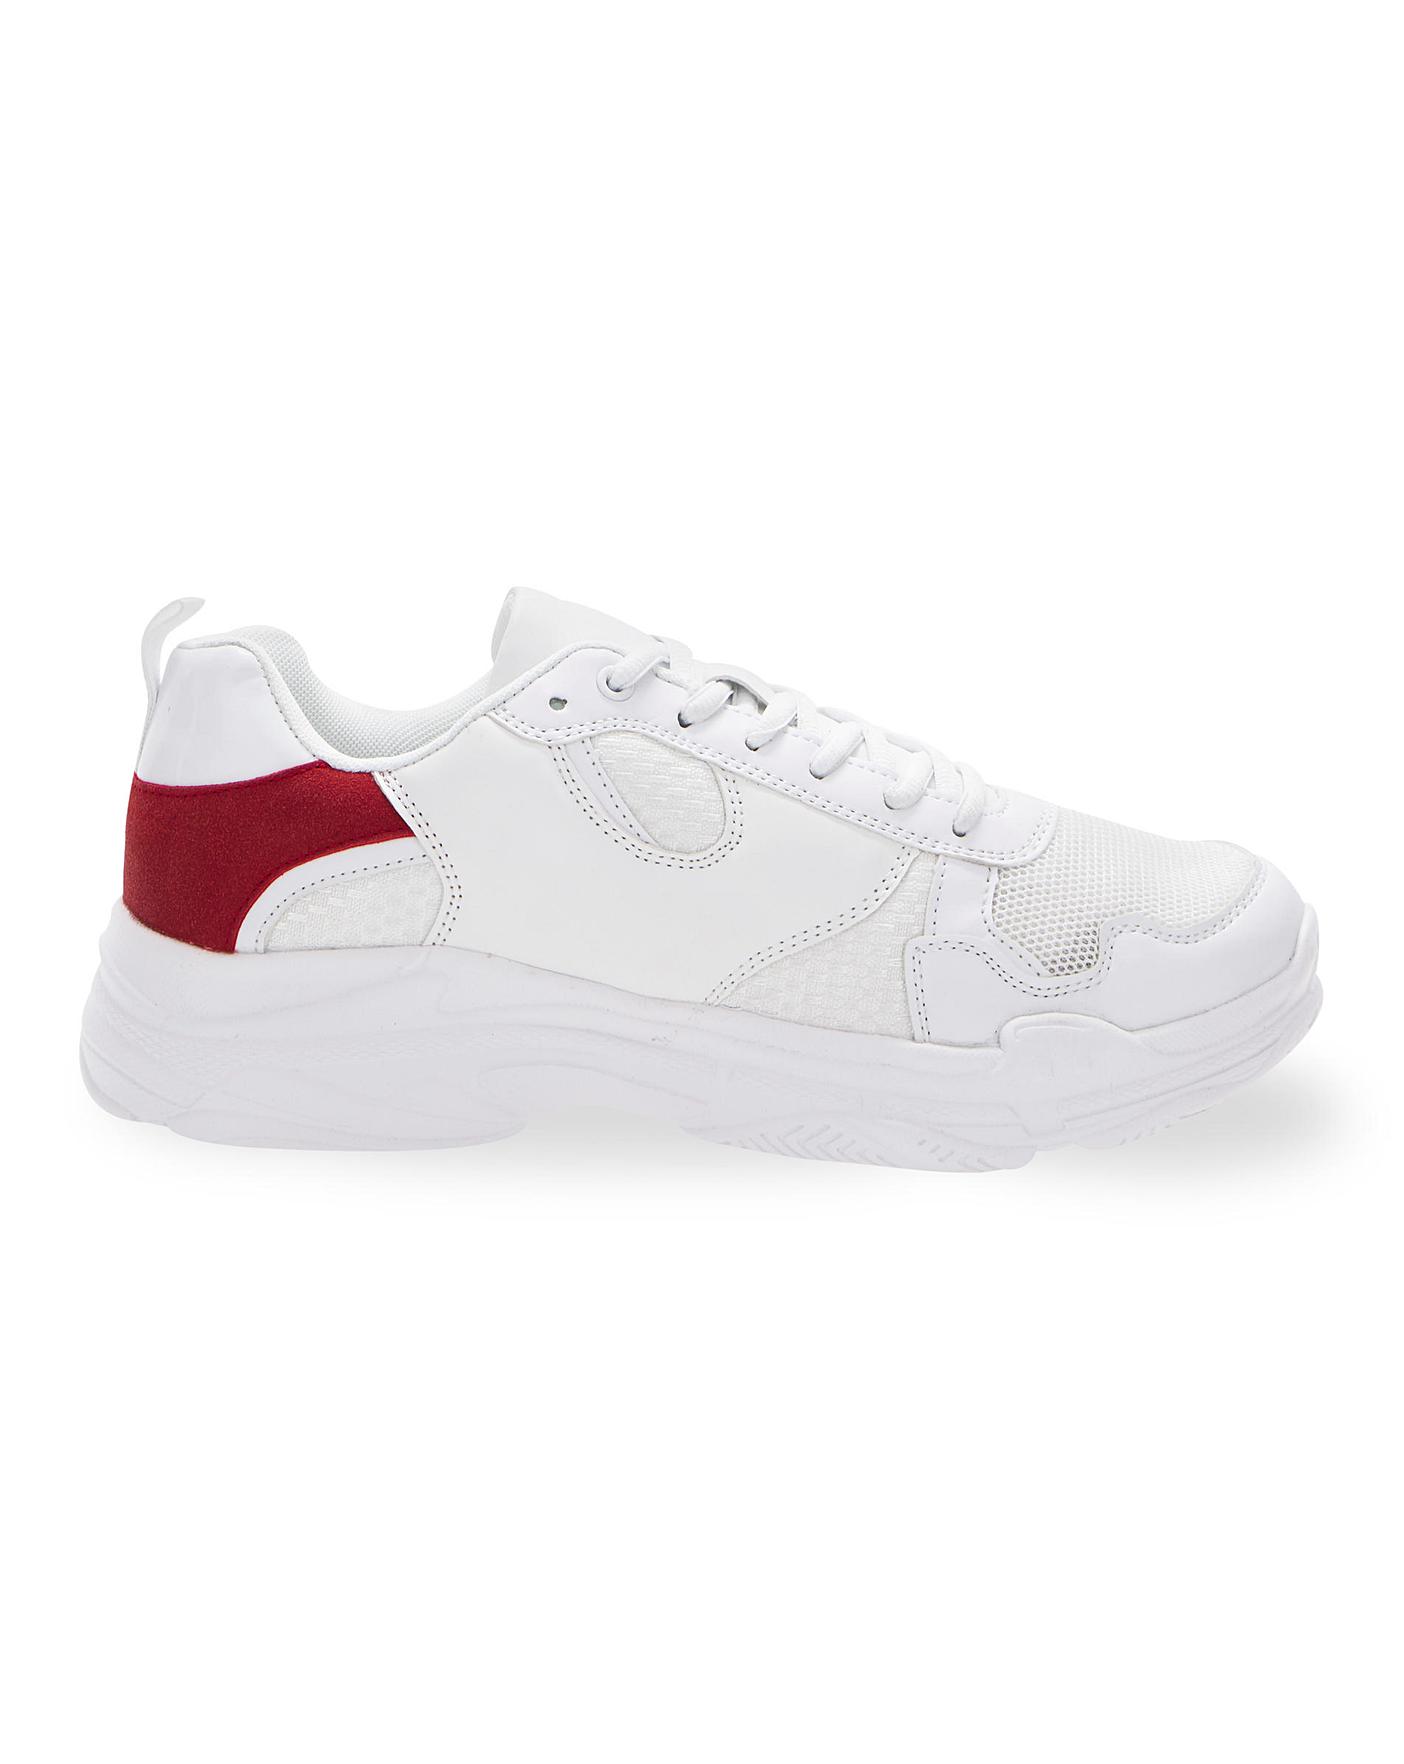 mens white and red trainers